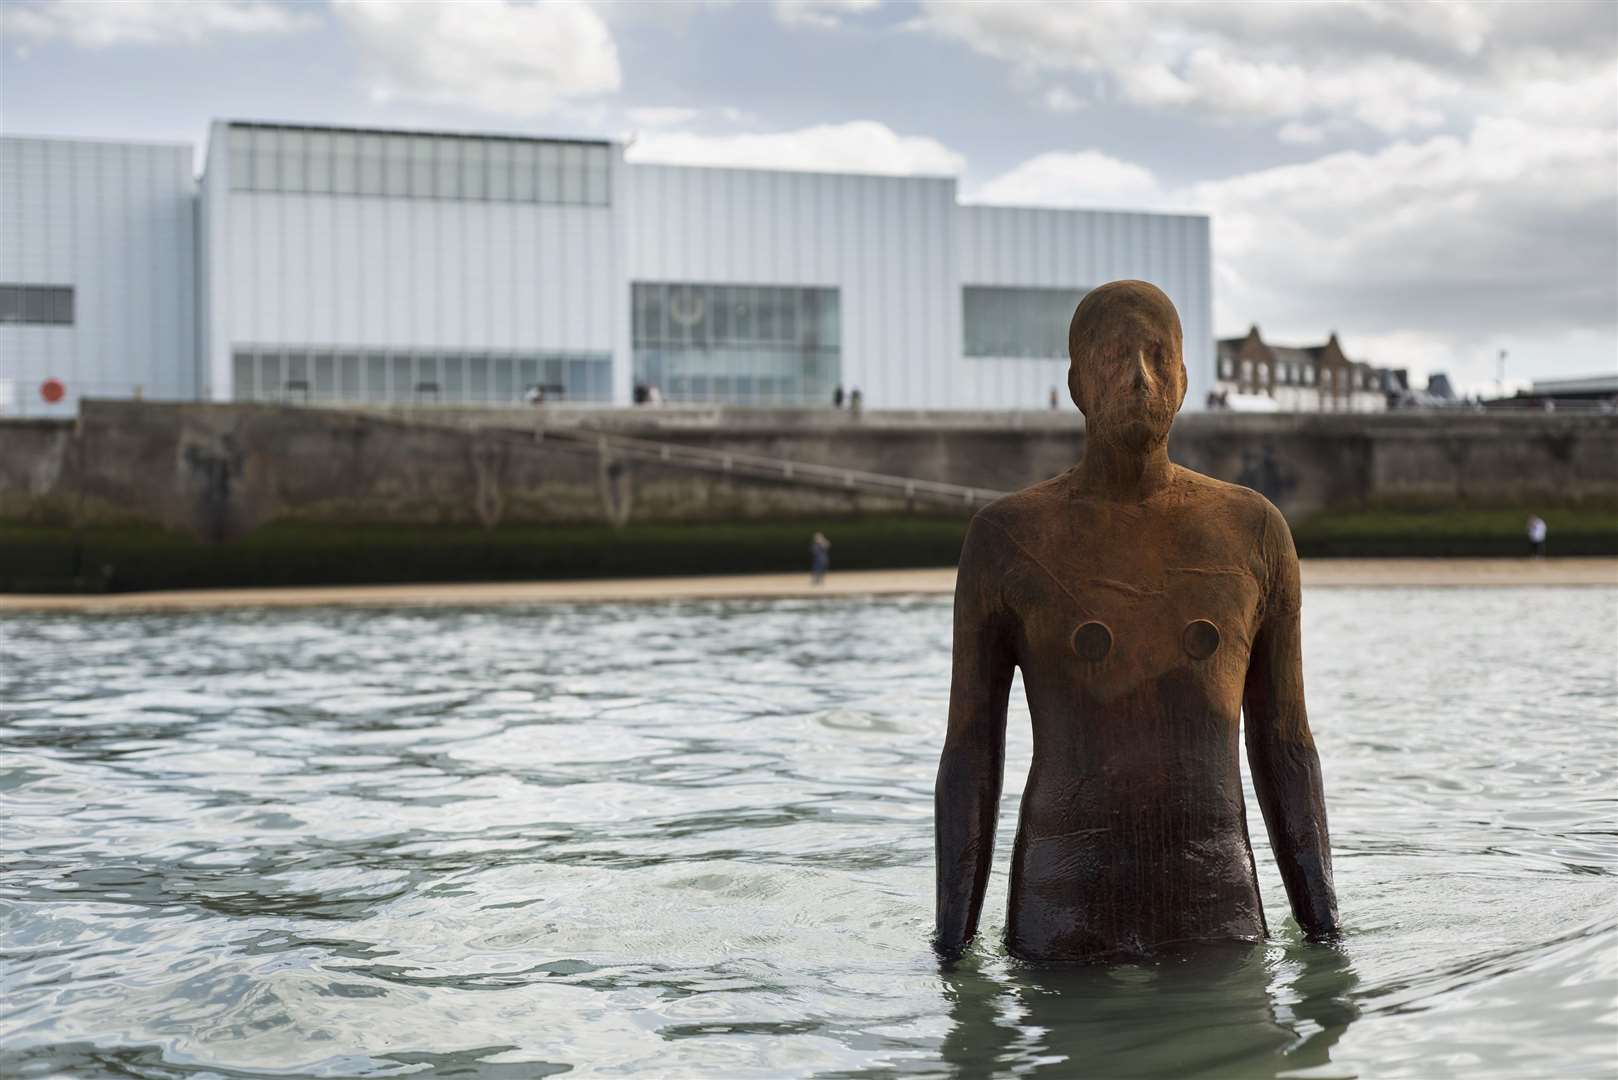 Antony Gormley's sculpture Another Time outside the Turner in Margate - he won the Turner Prize in 1994 for other bronze casts of himself